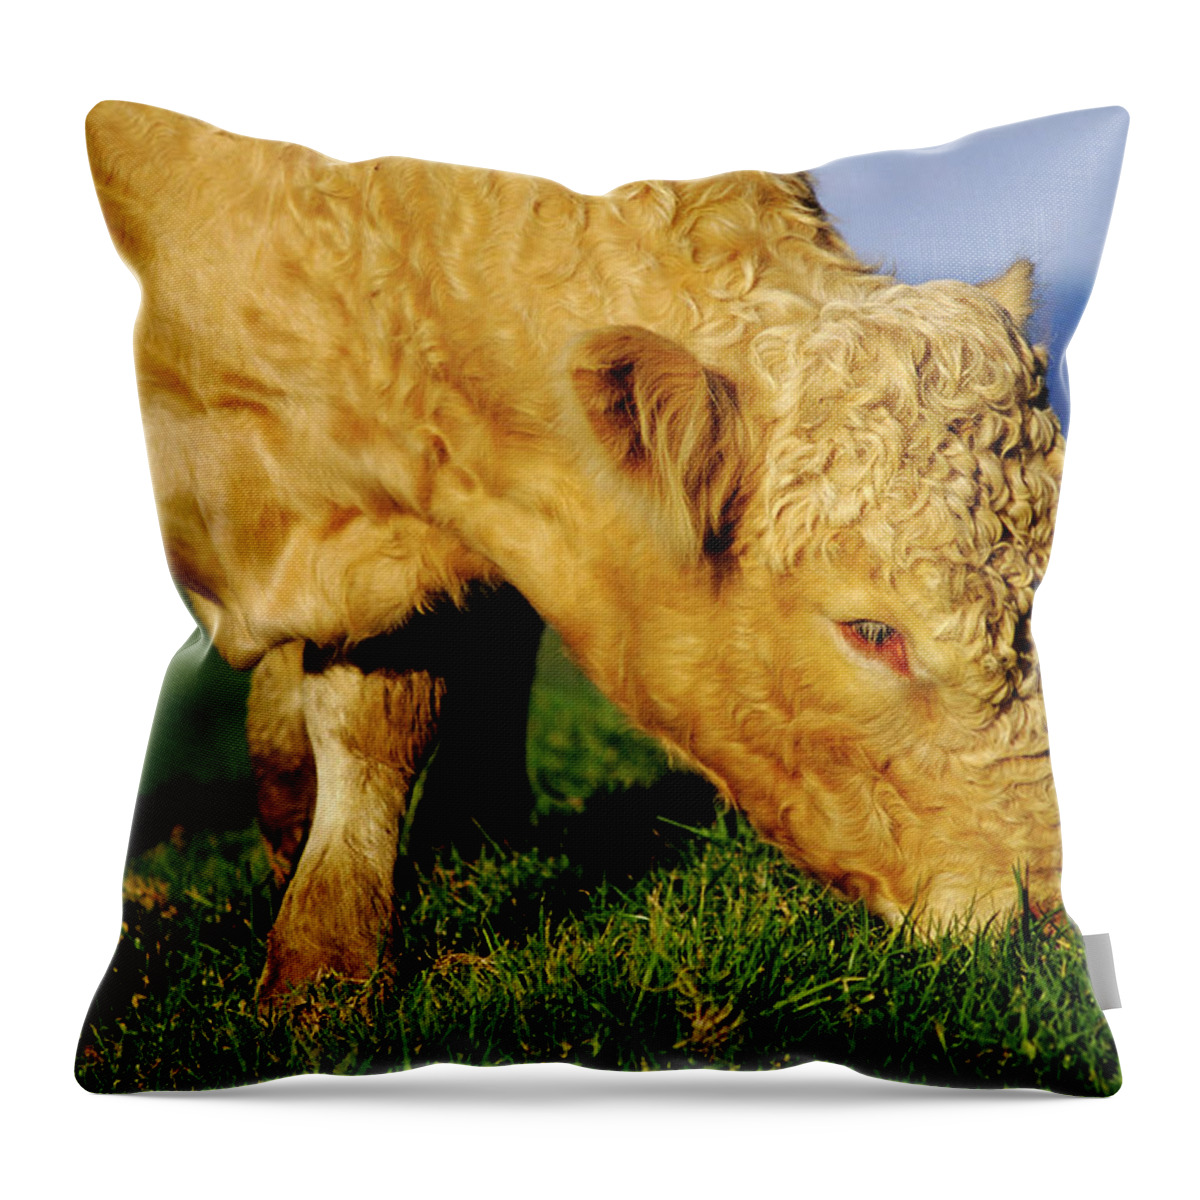 Grass Throw Pillow featuring the photograph Free Range Cow by Tammy616